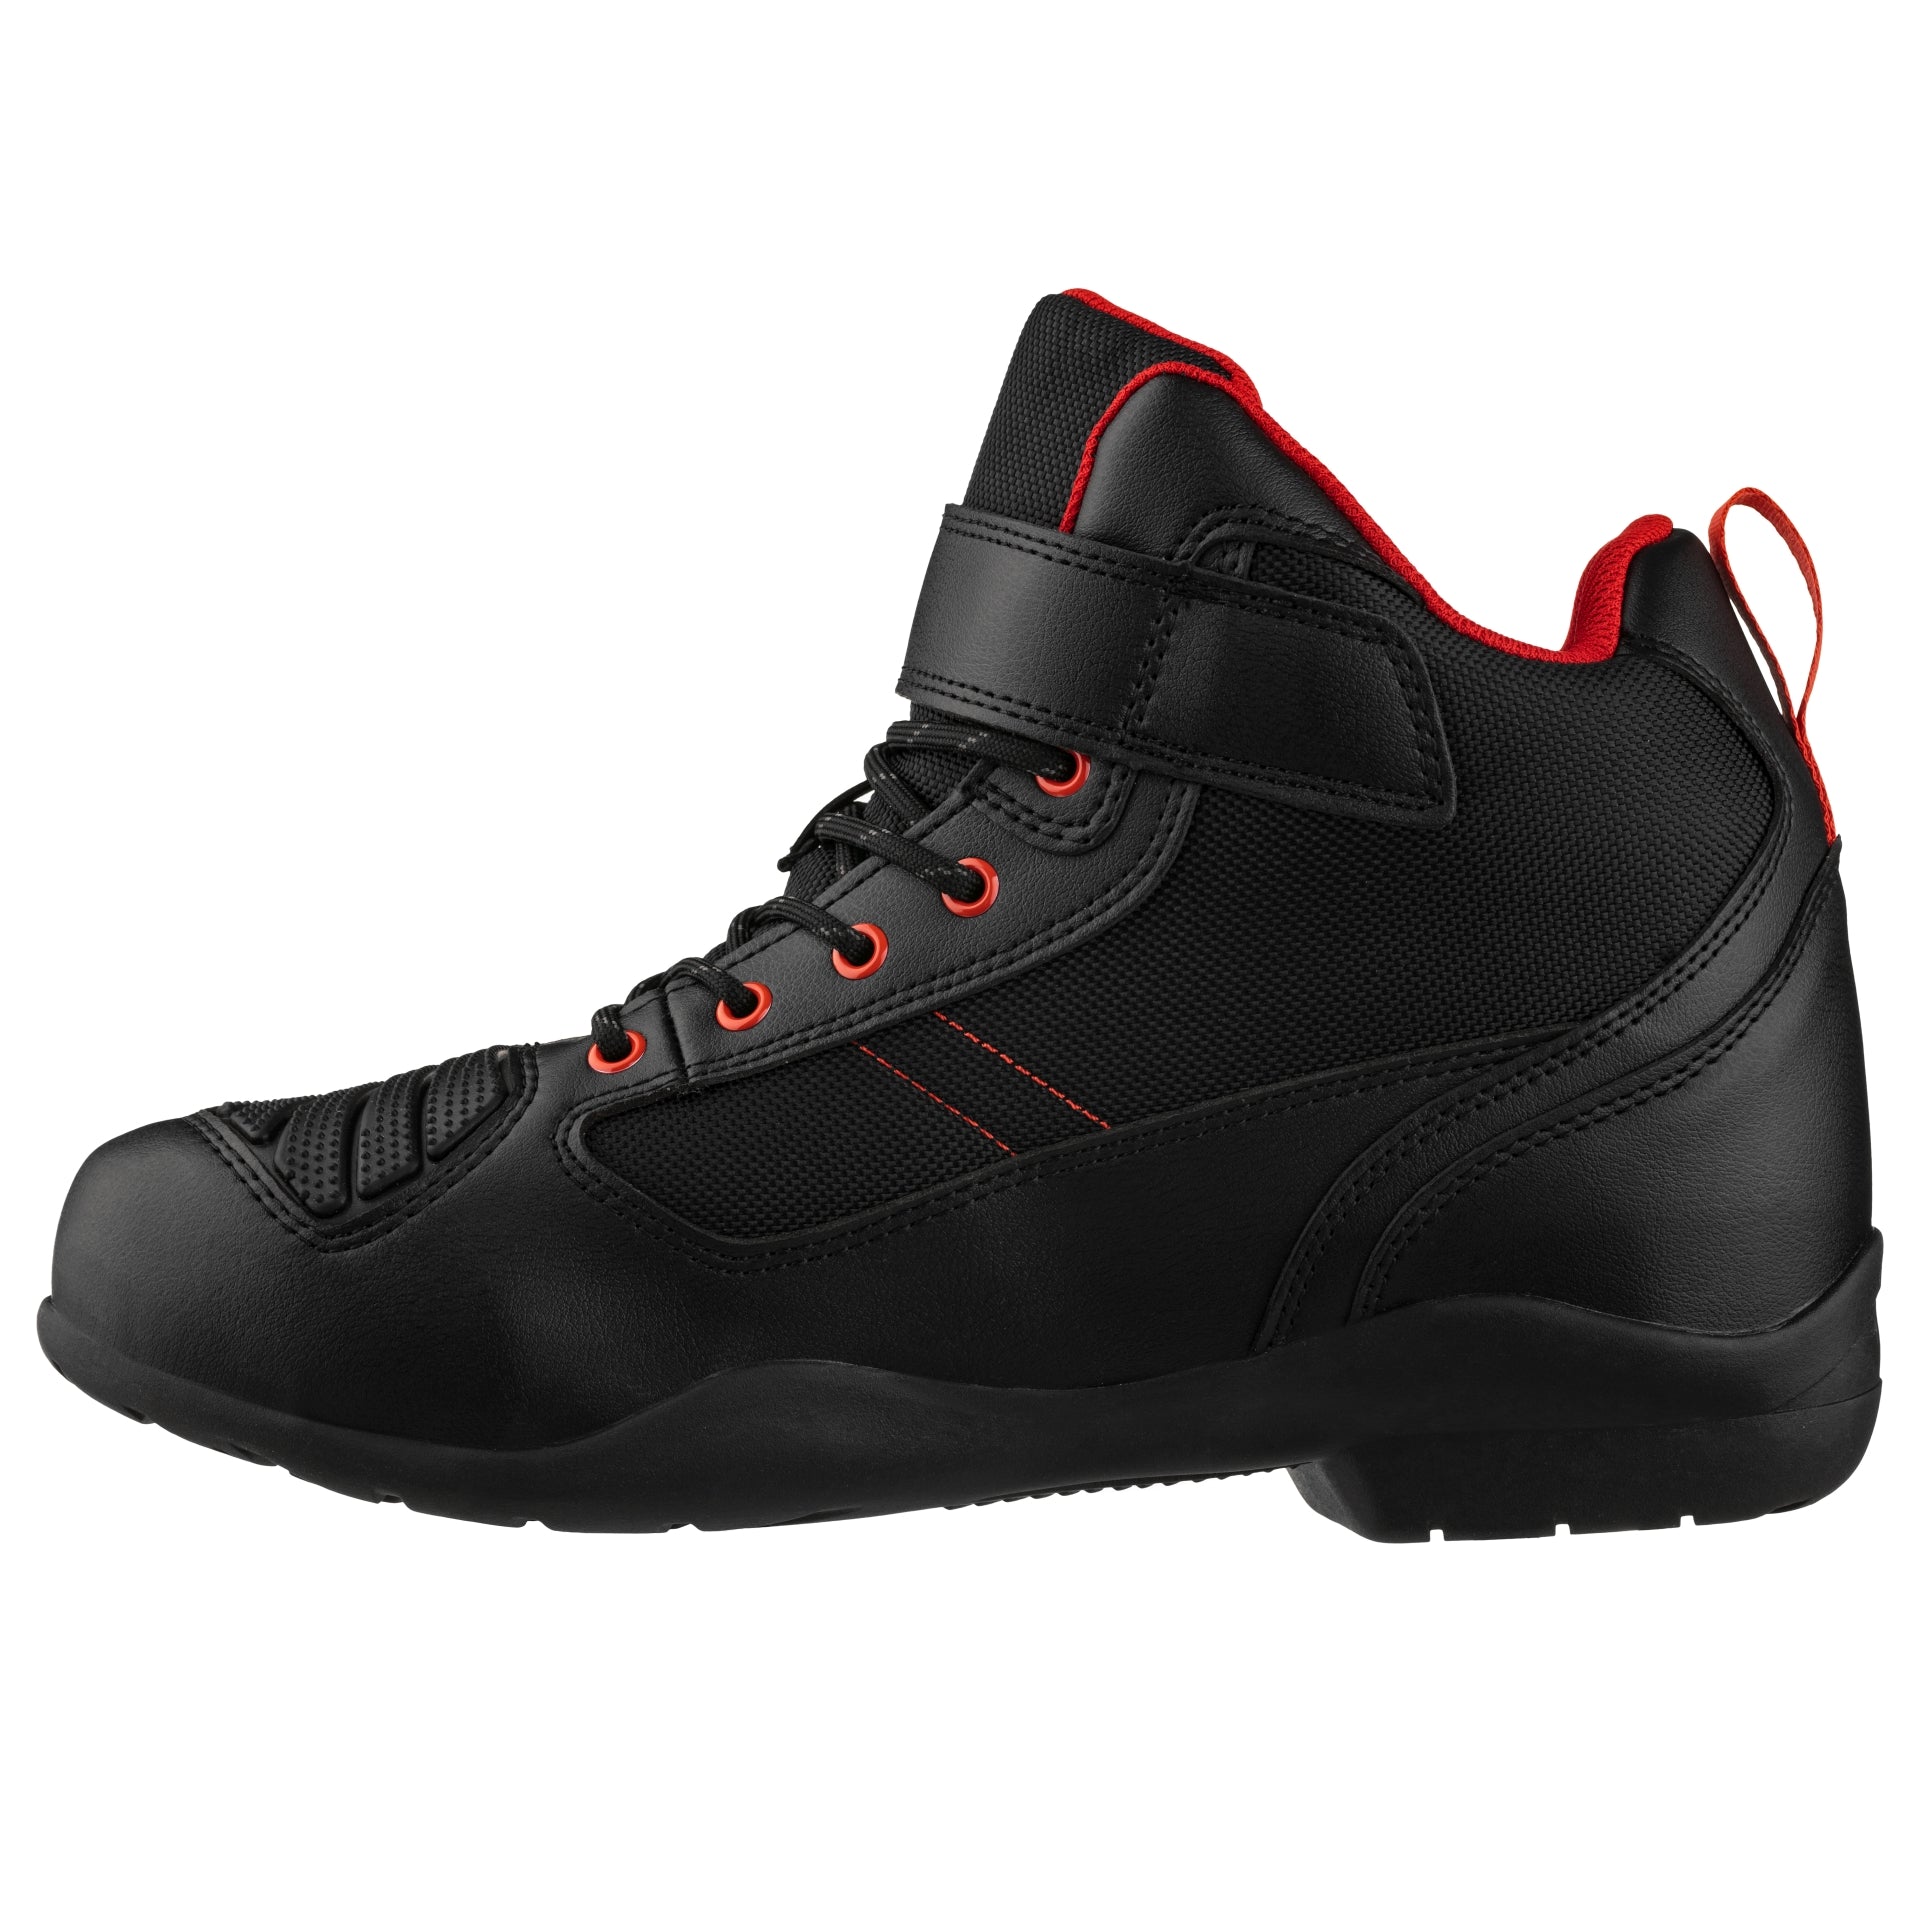 Elevator shoes height increase CALTO - S4039 - 3.2 Inches Taller (Black/Red) - Motorcycle Boots